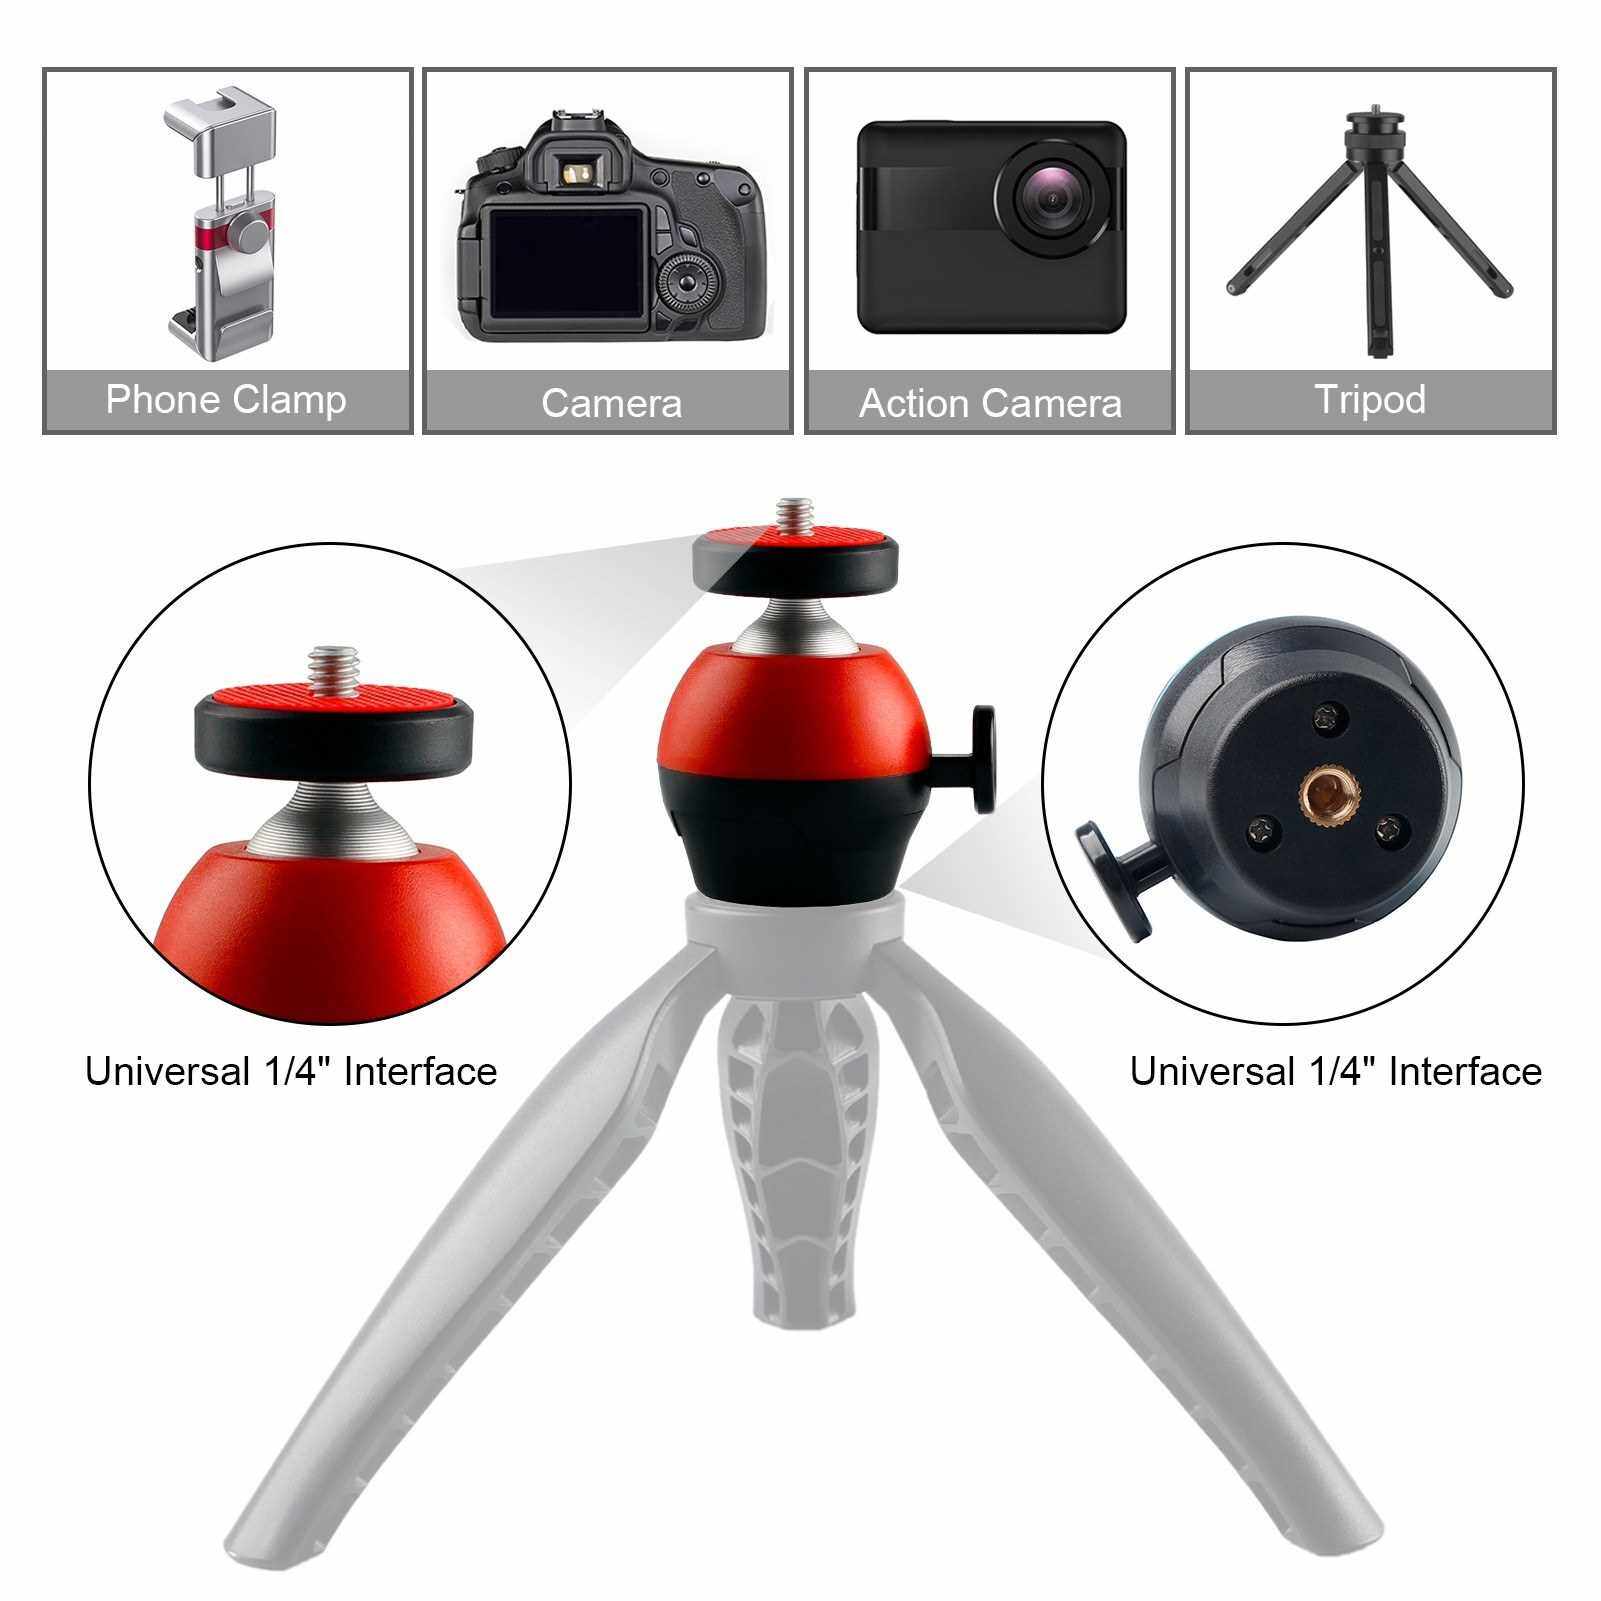 Best Selling Mini Ball Head Camera Tripod Mount CNC Technology 360 Swivel with Universal 1/4-inch Interface for DSLR SLR Tripod Mounting (Red)